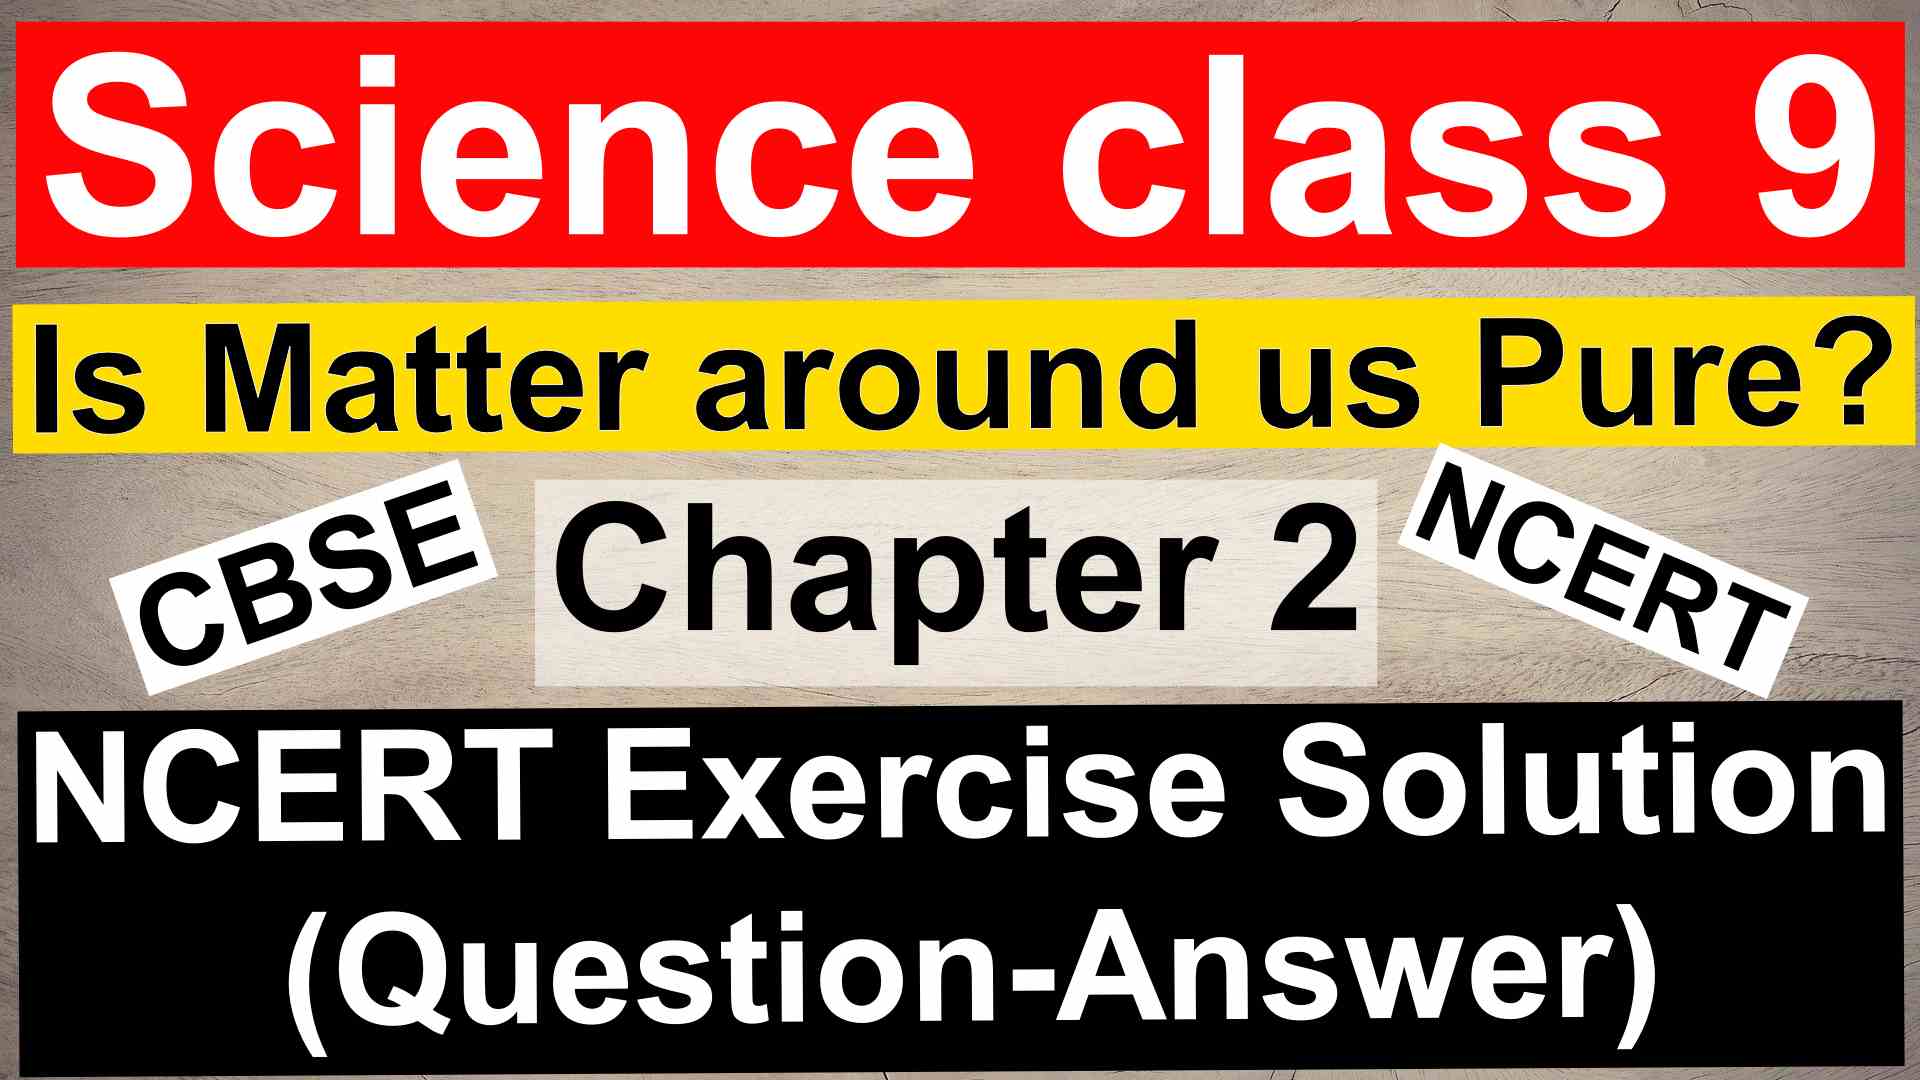 Science class 9– Chapter 2 - Is Matter around us Pure– NCERT Exercise Solution ( Question-Answer)